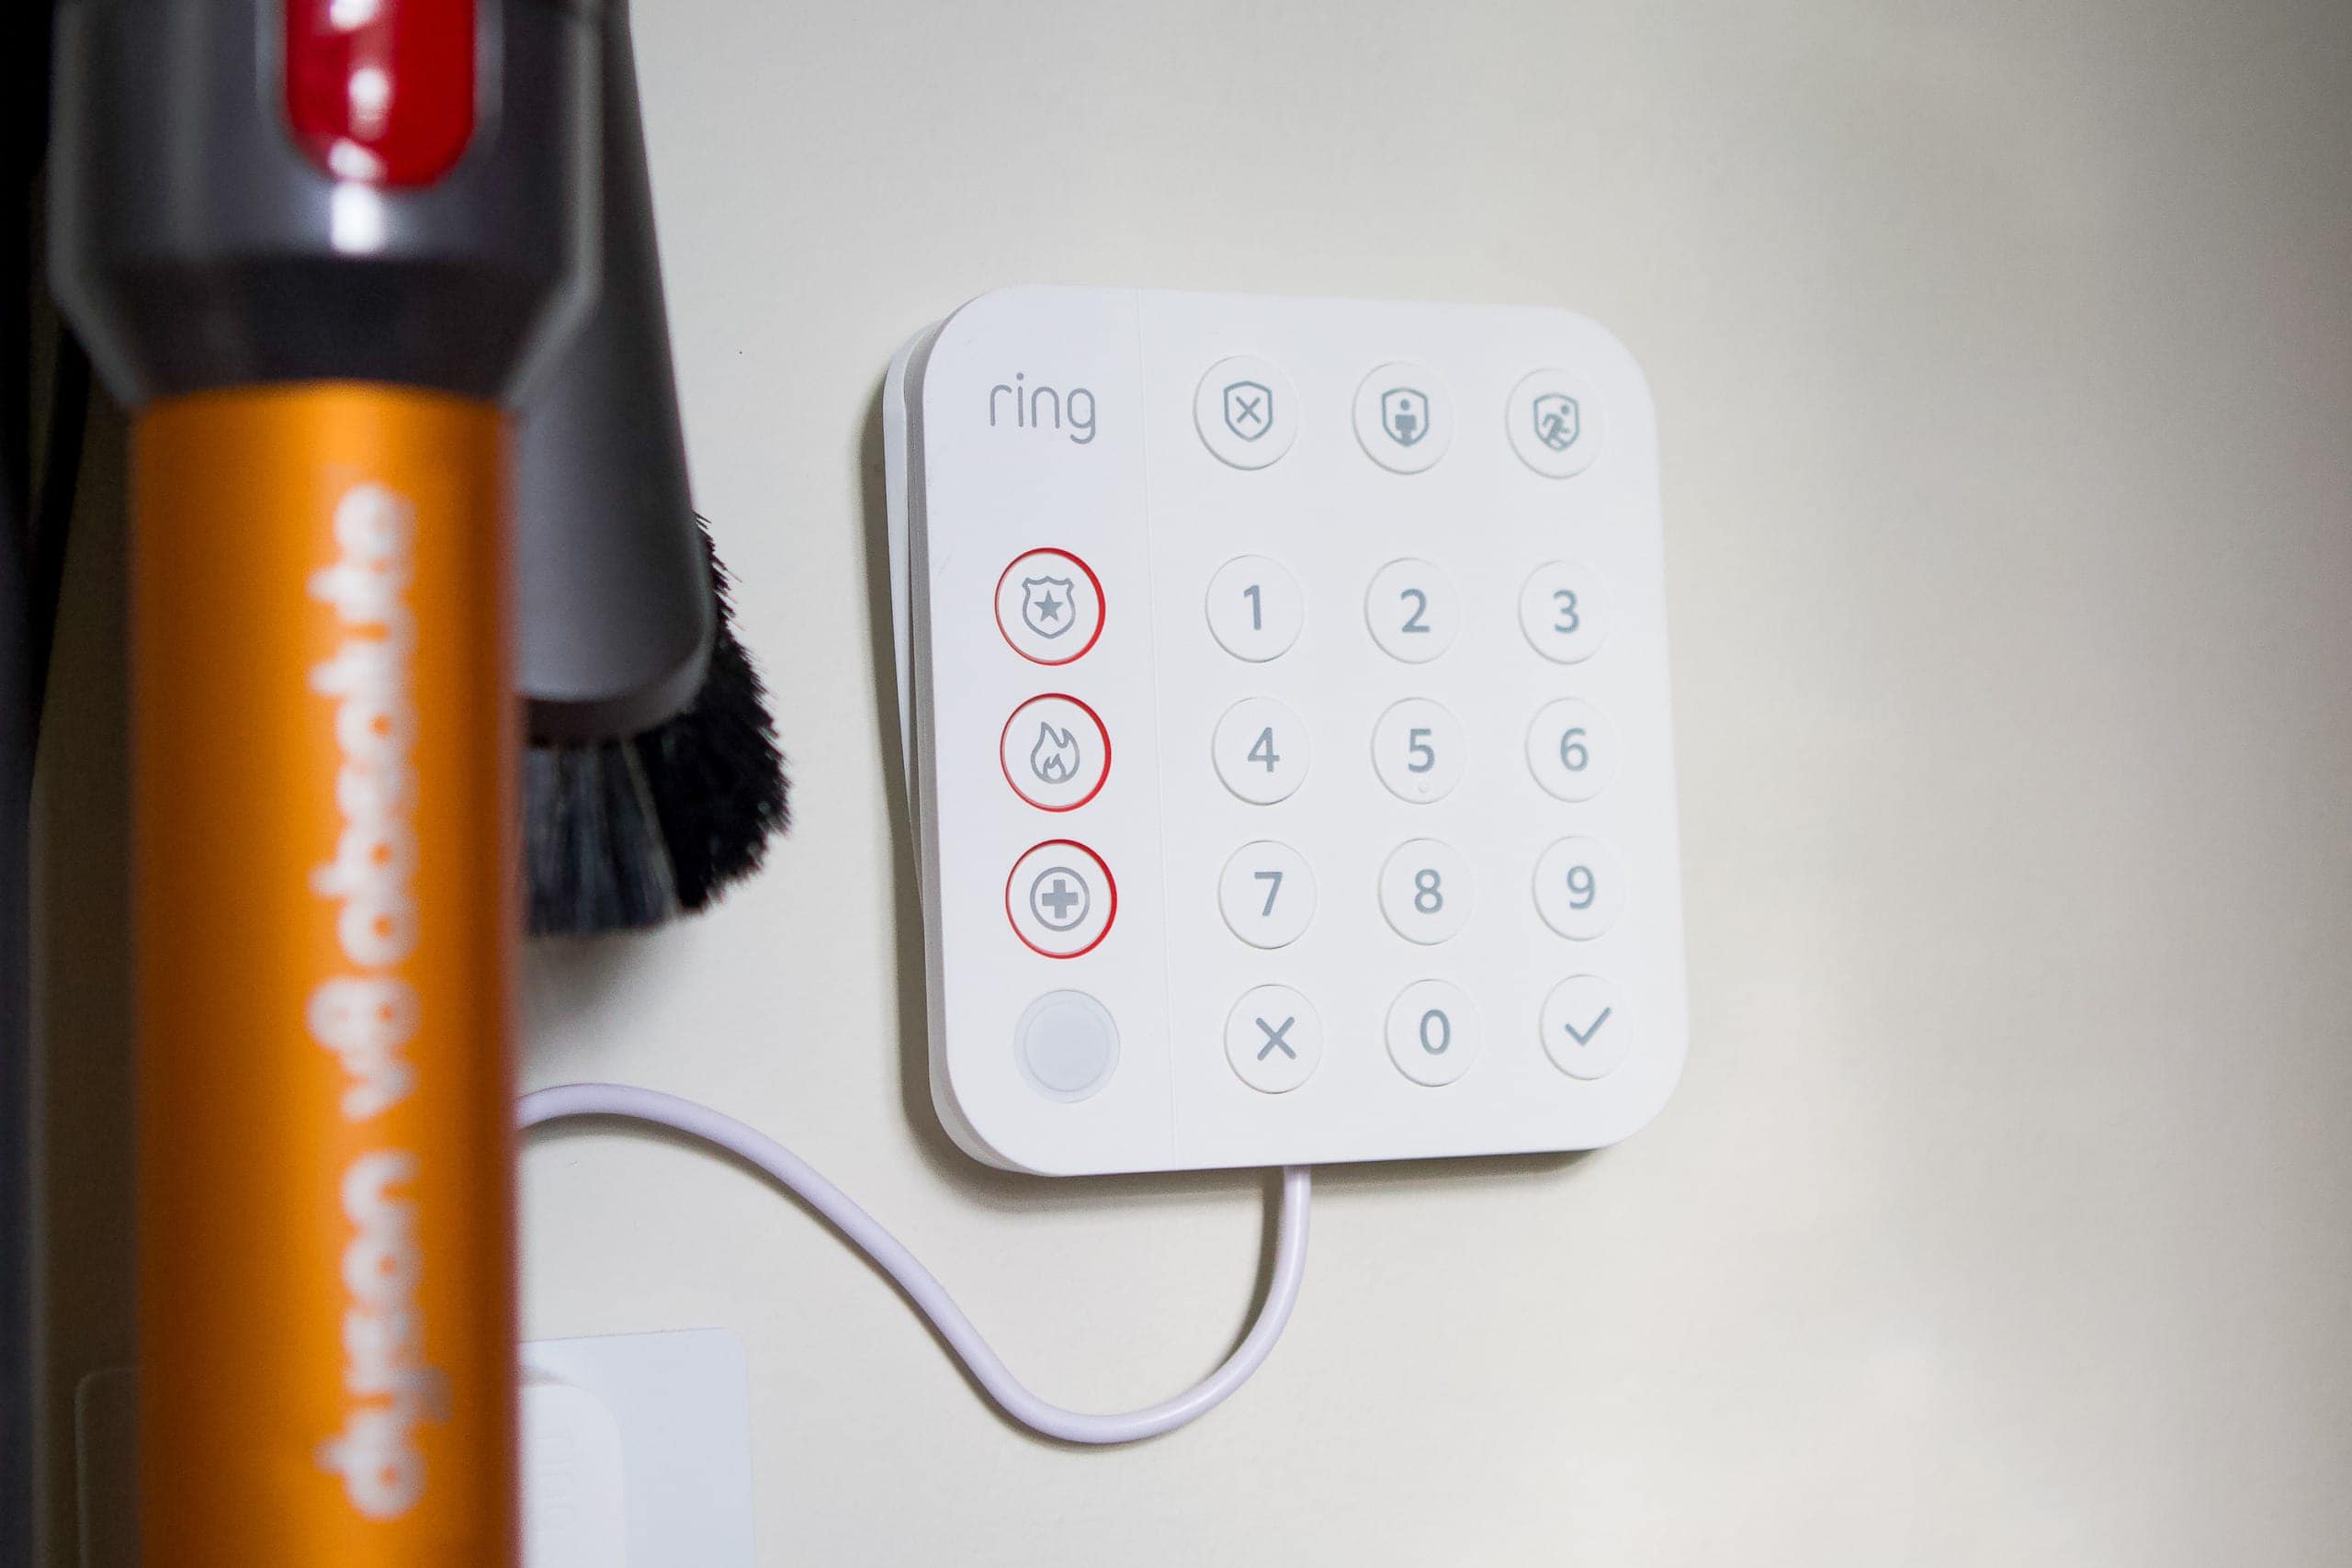 Ring keypad for home security system